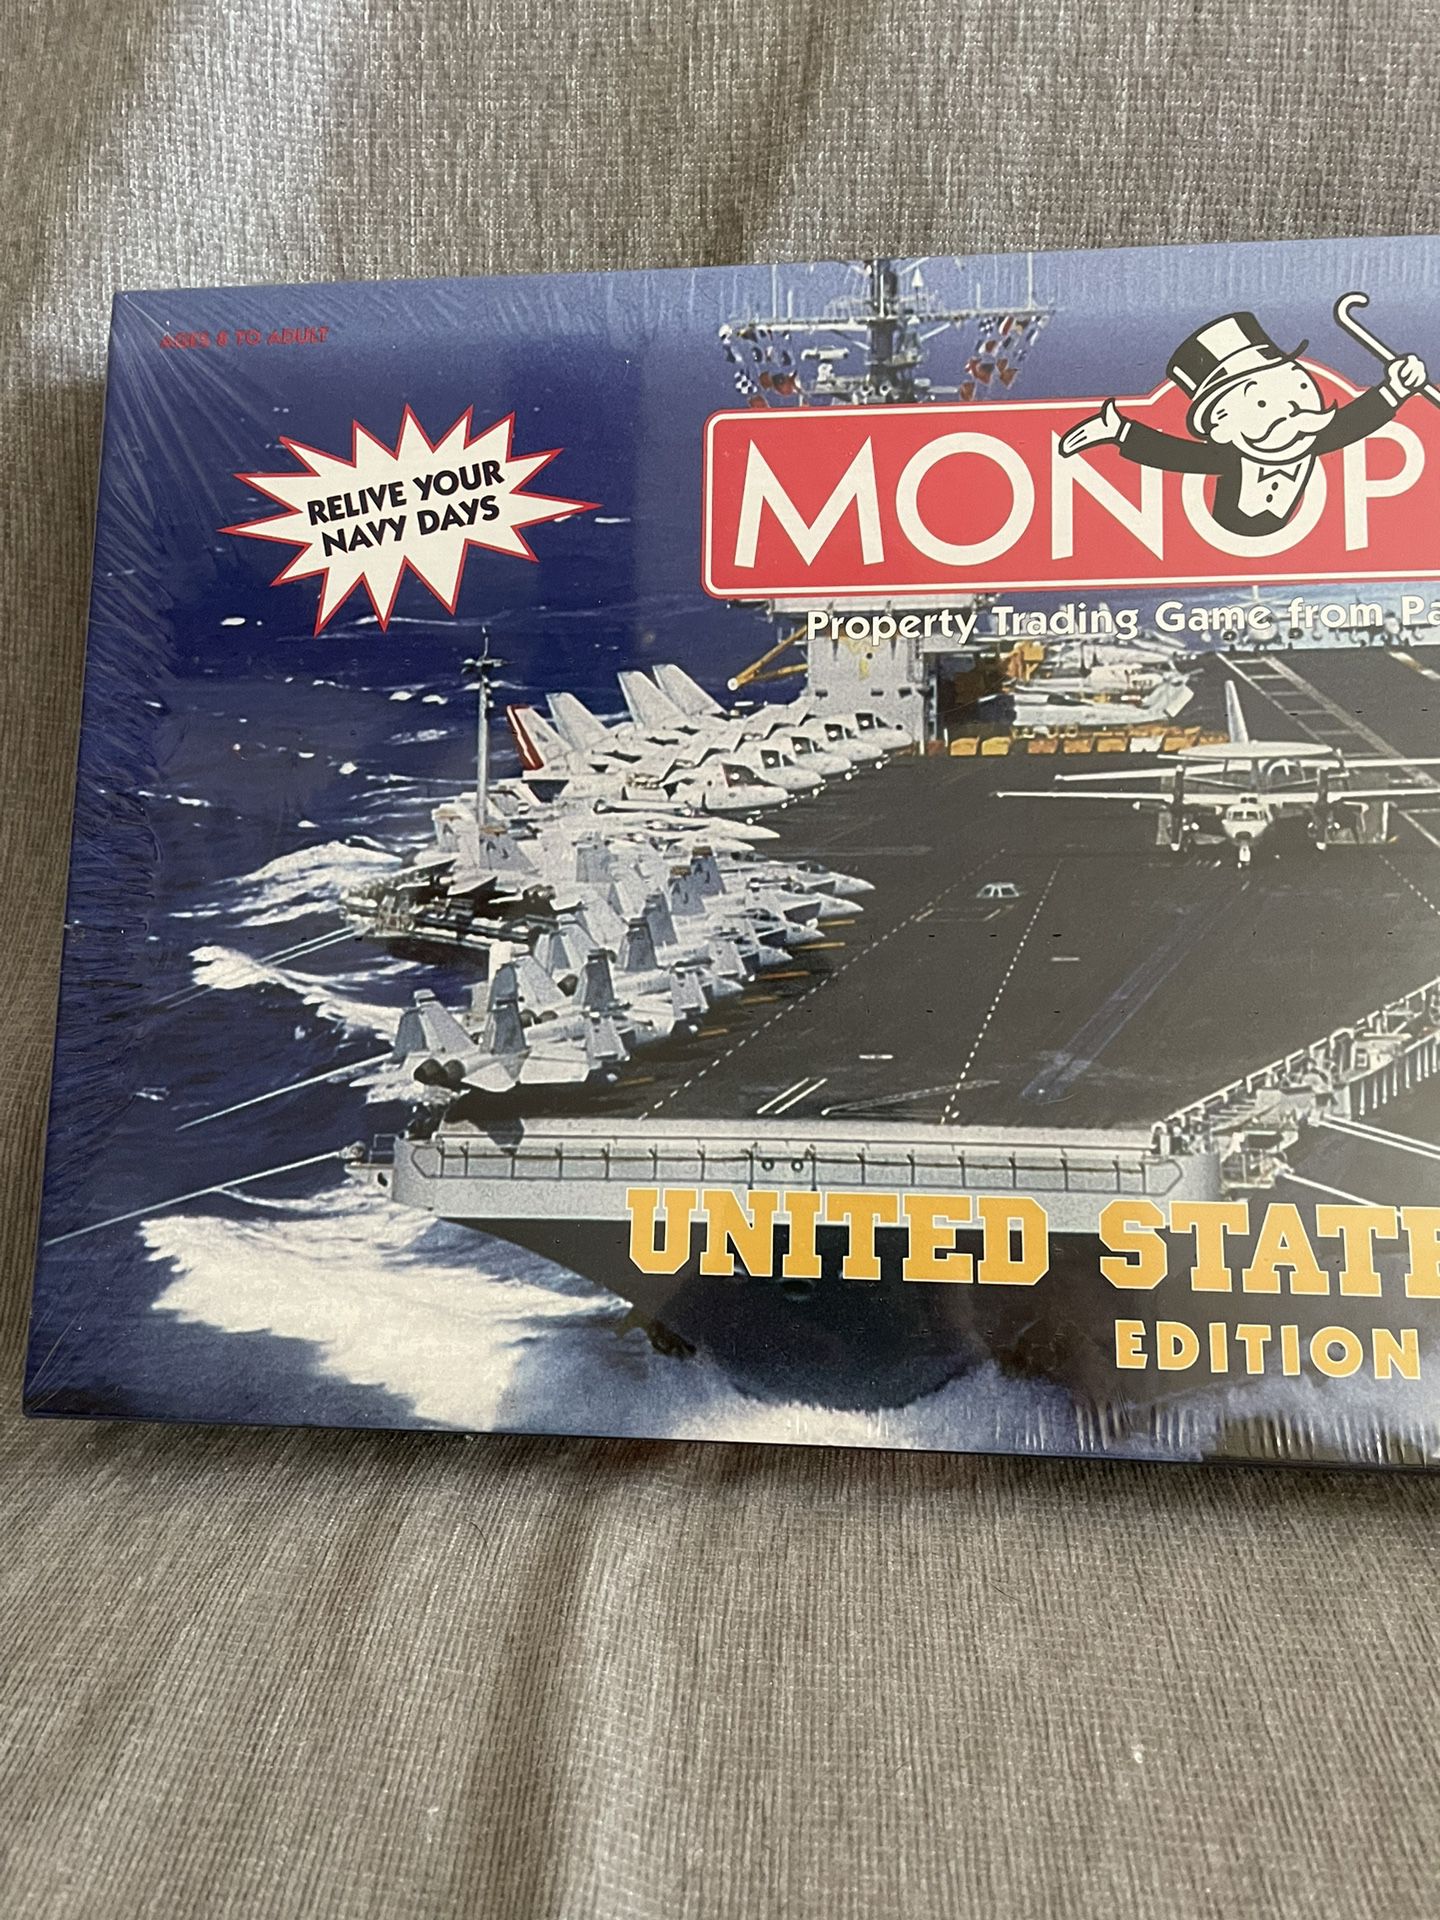 1998 Monopoly US Navy Board Game (Sealed - Never Been Used)